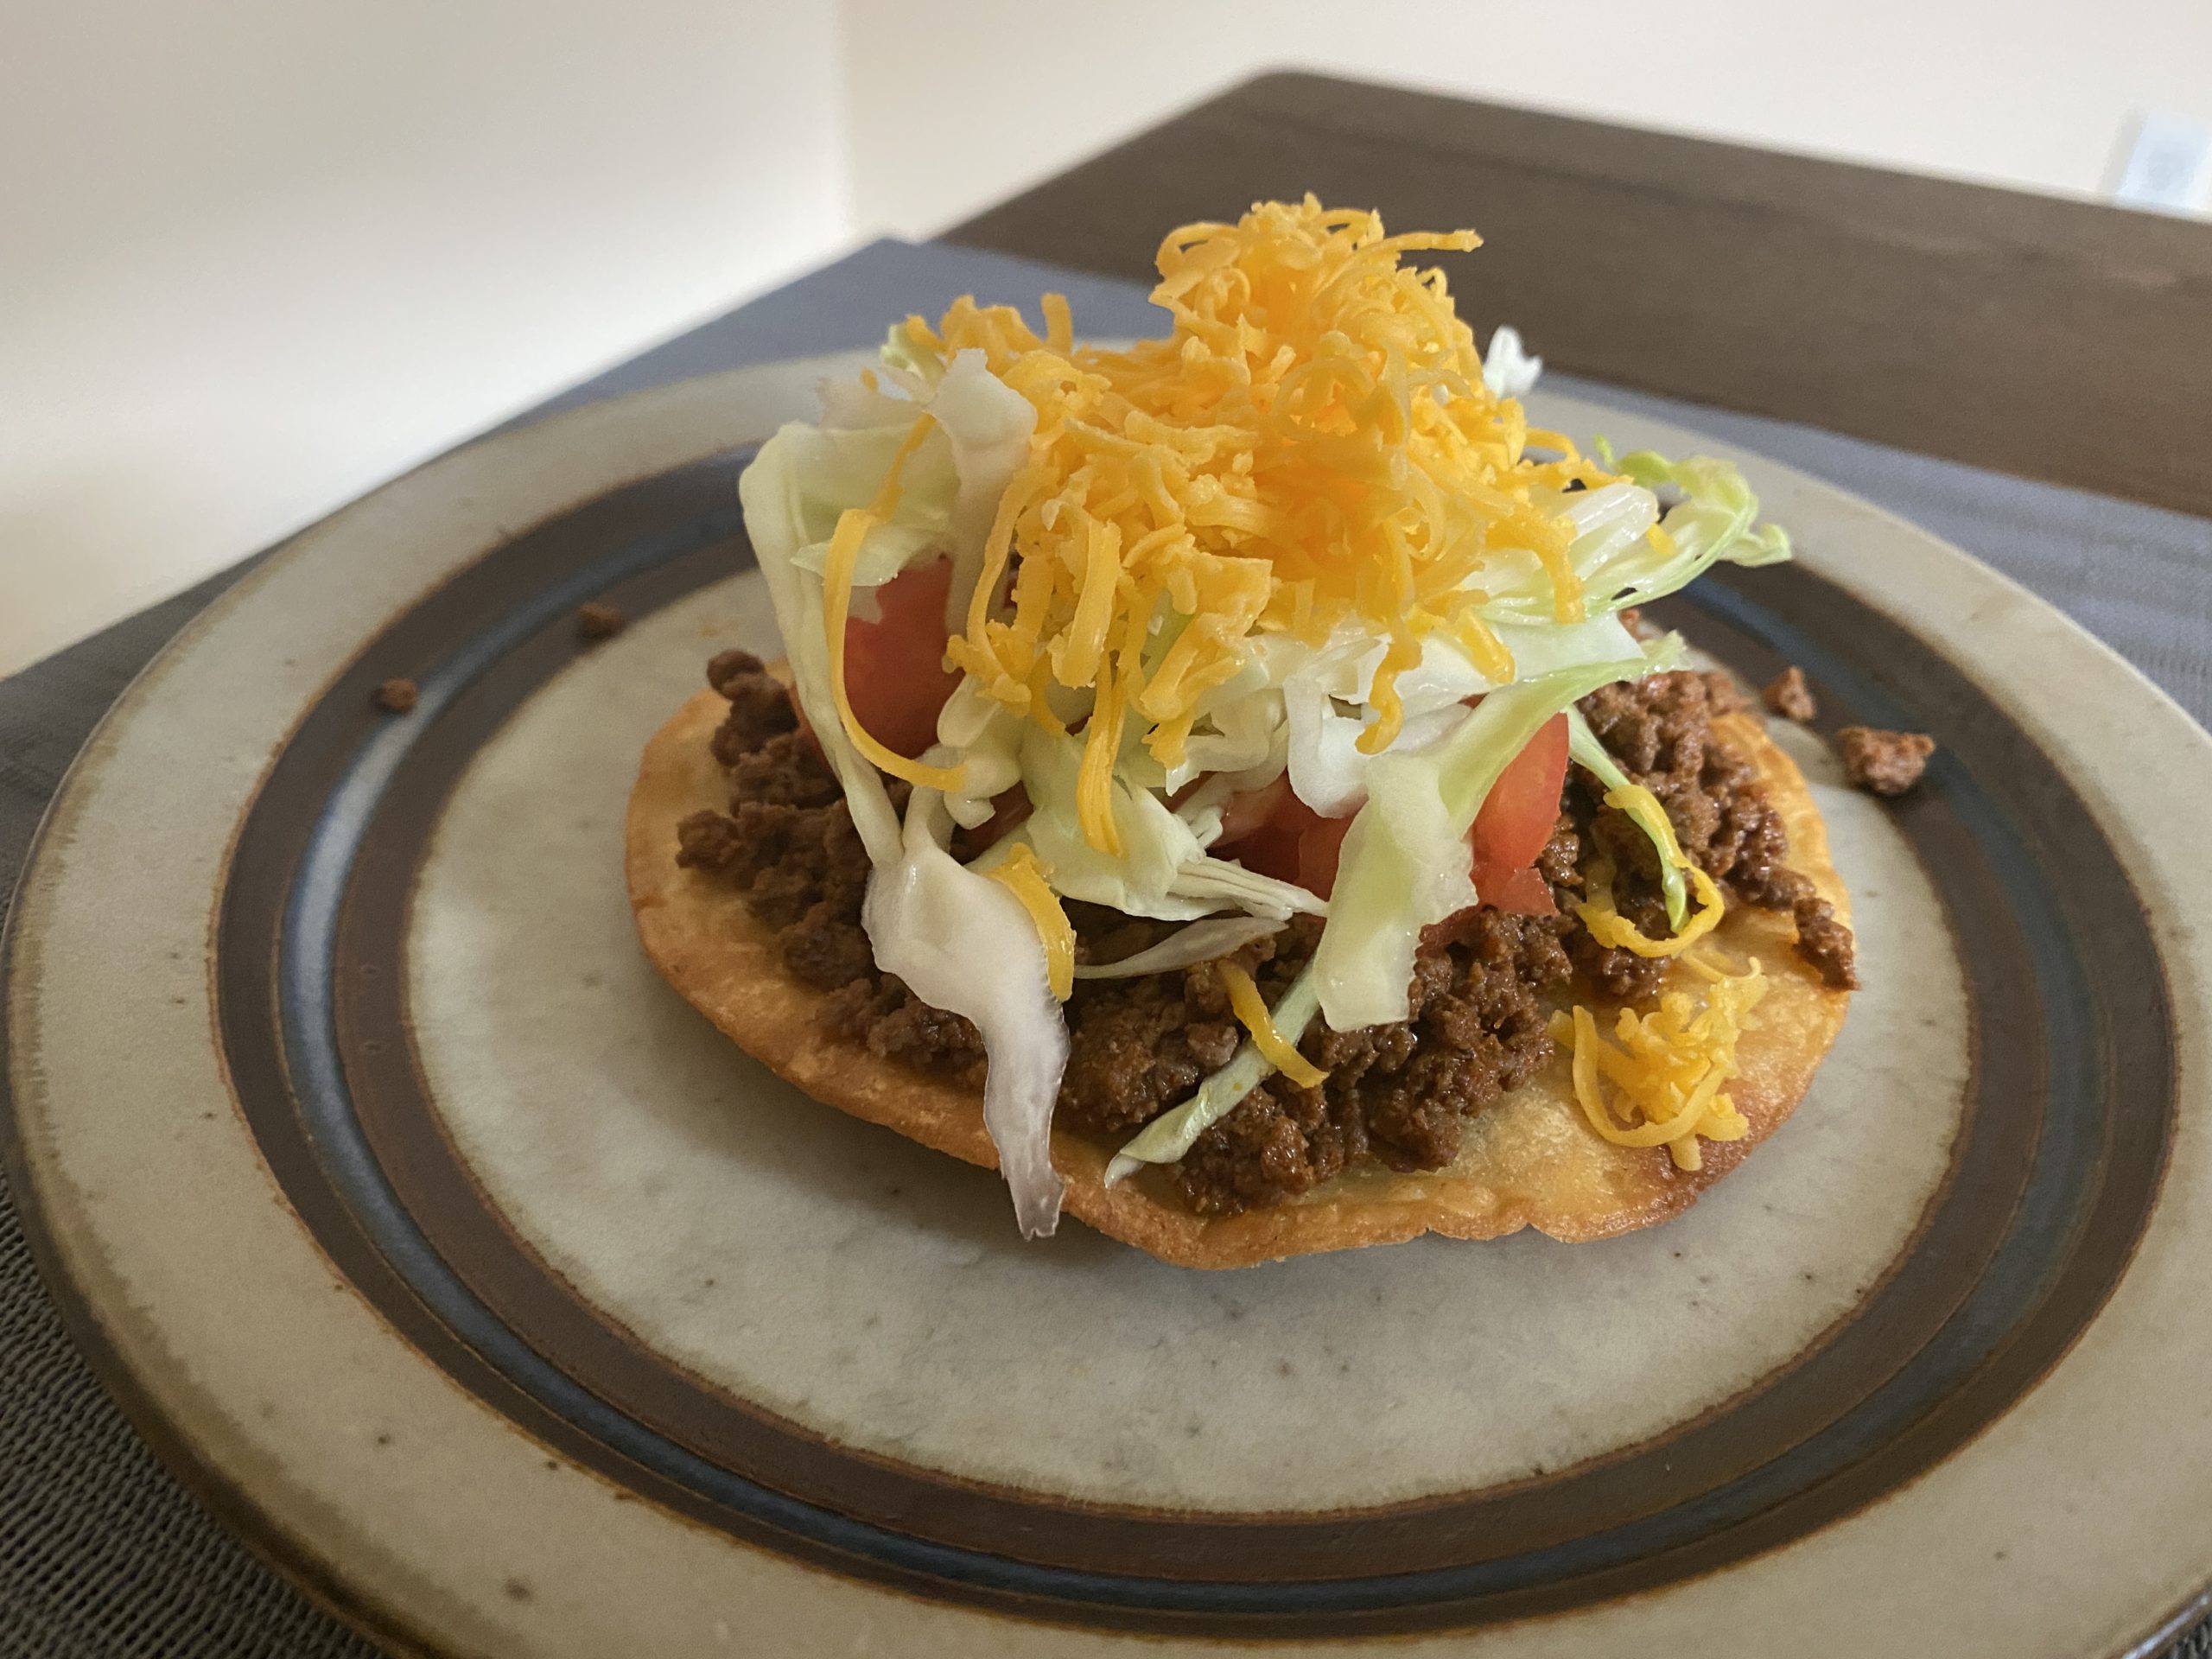 How to Make Salbutes — A Staple Dish in Belize